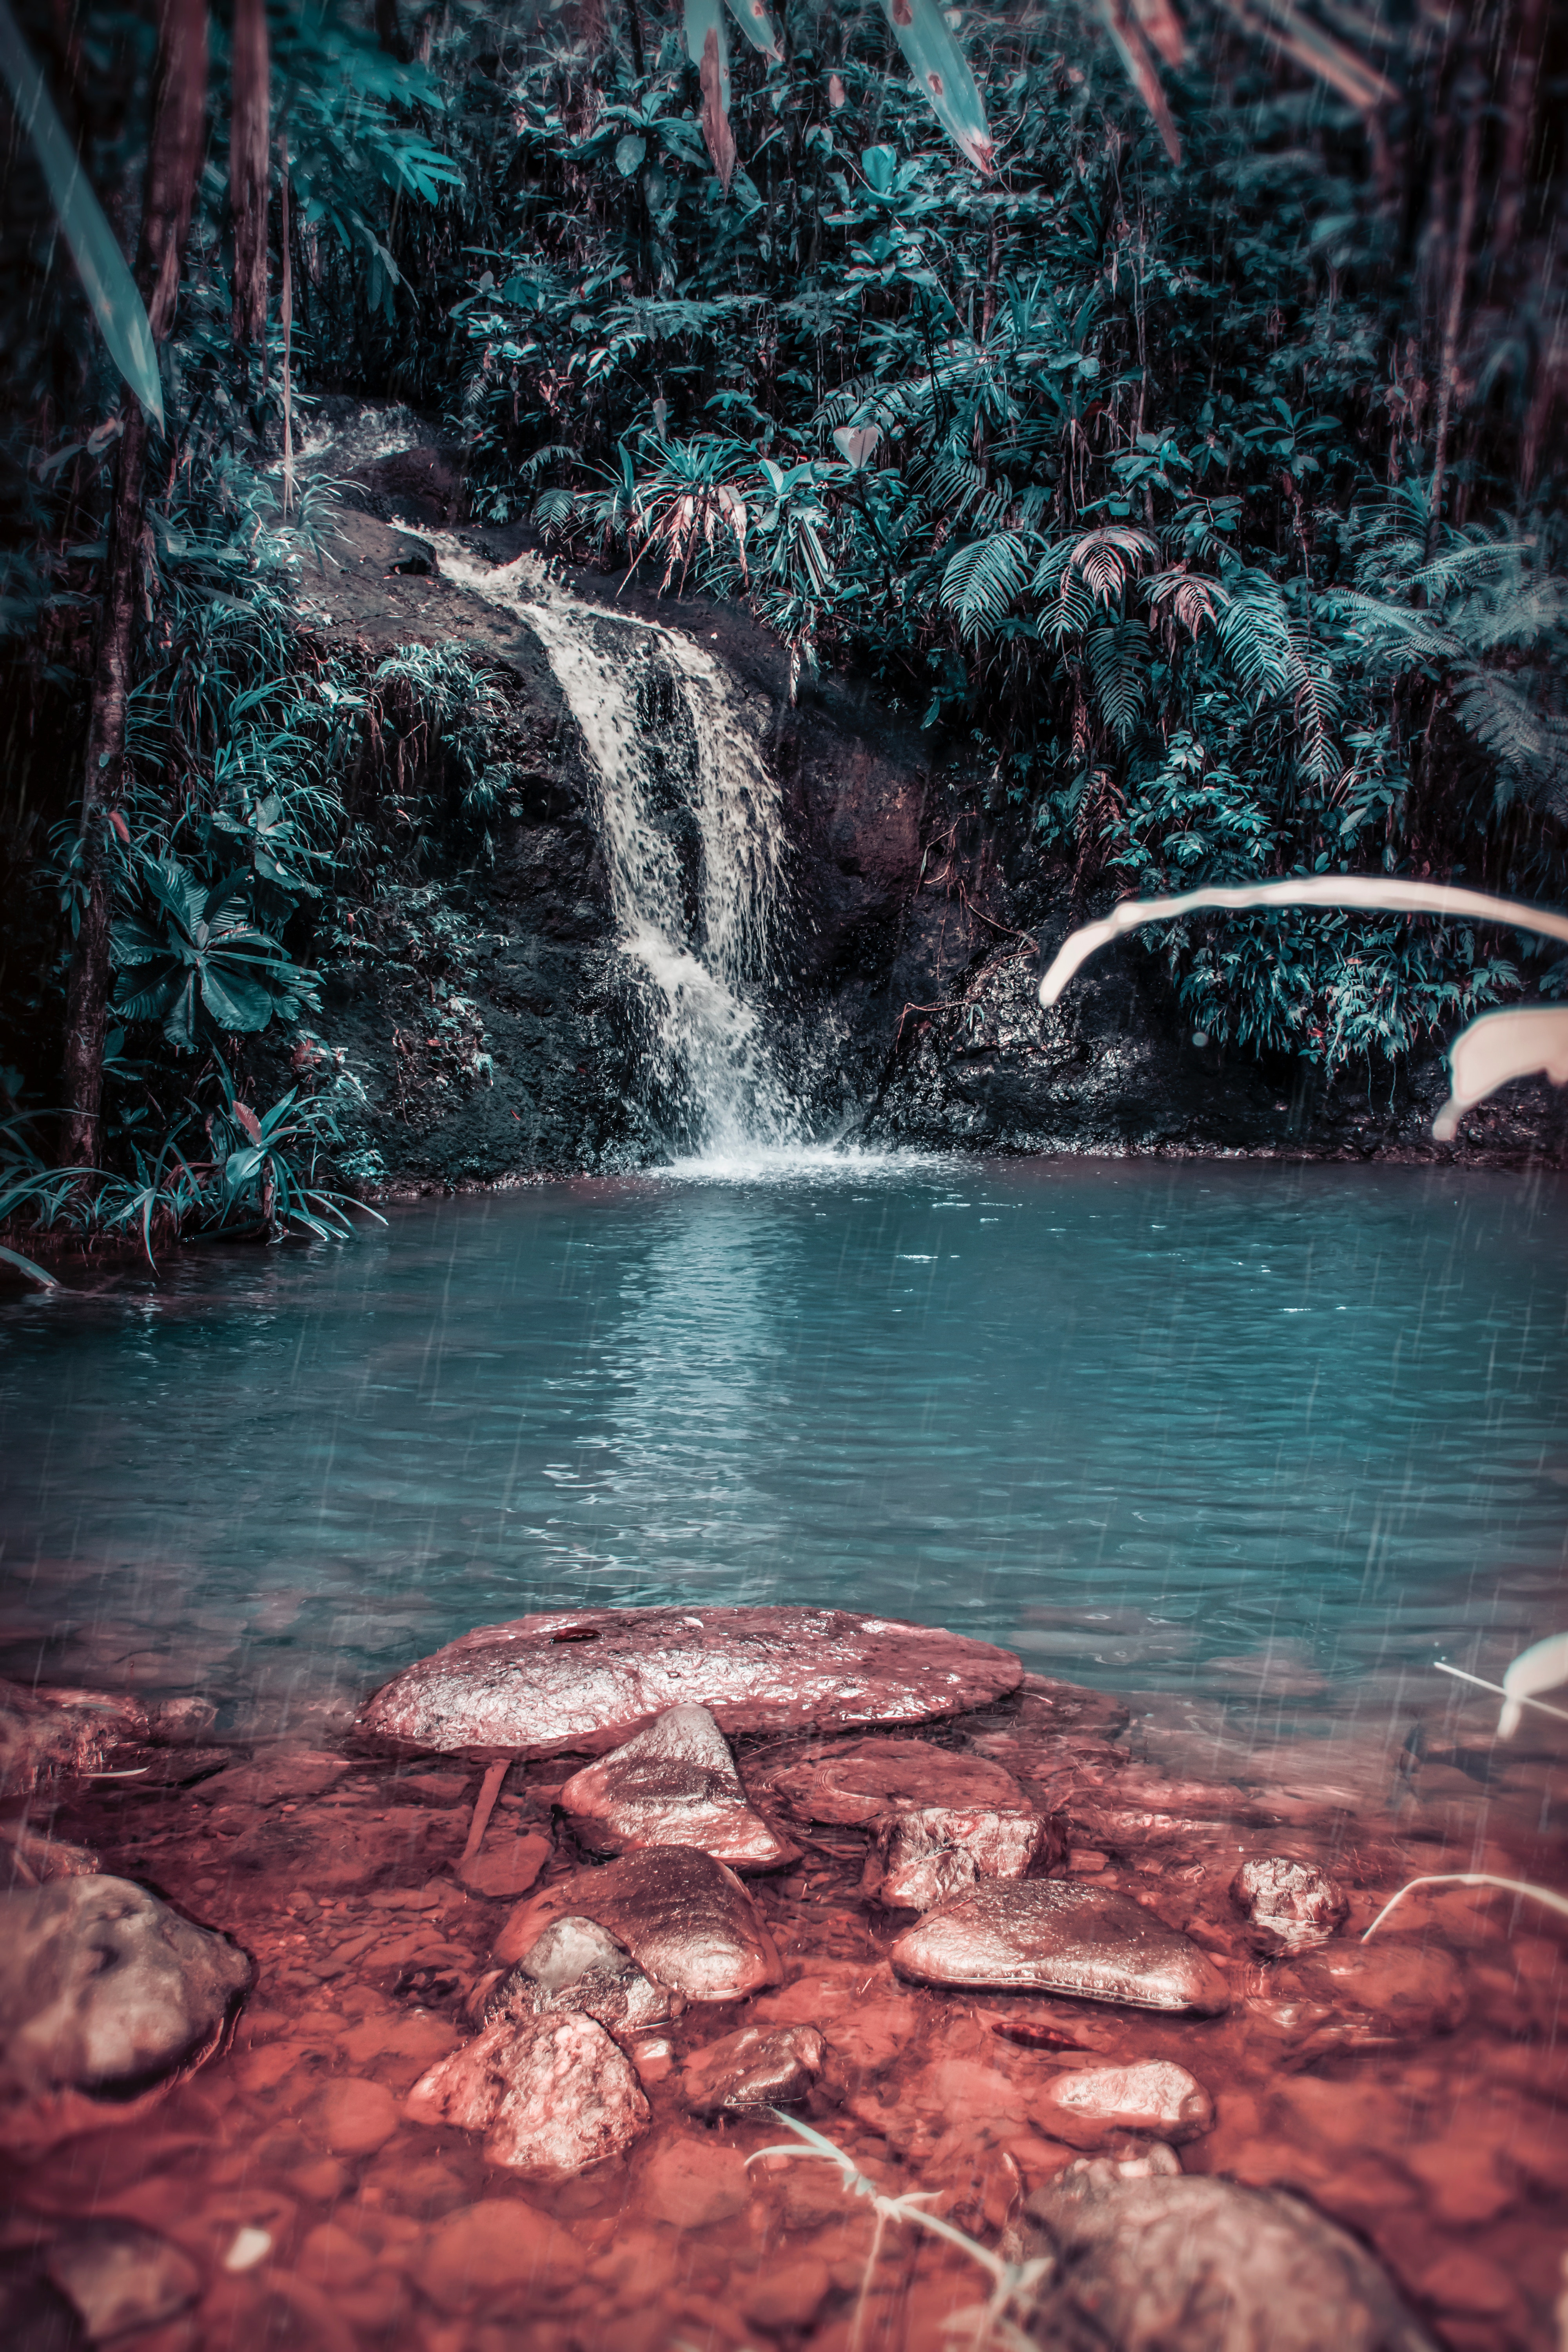 spray, tropical, nature, jungle, waterfall, creek, forest, brook, stones